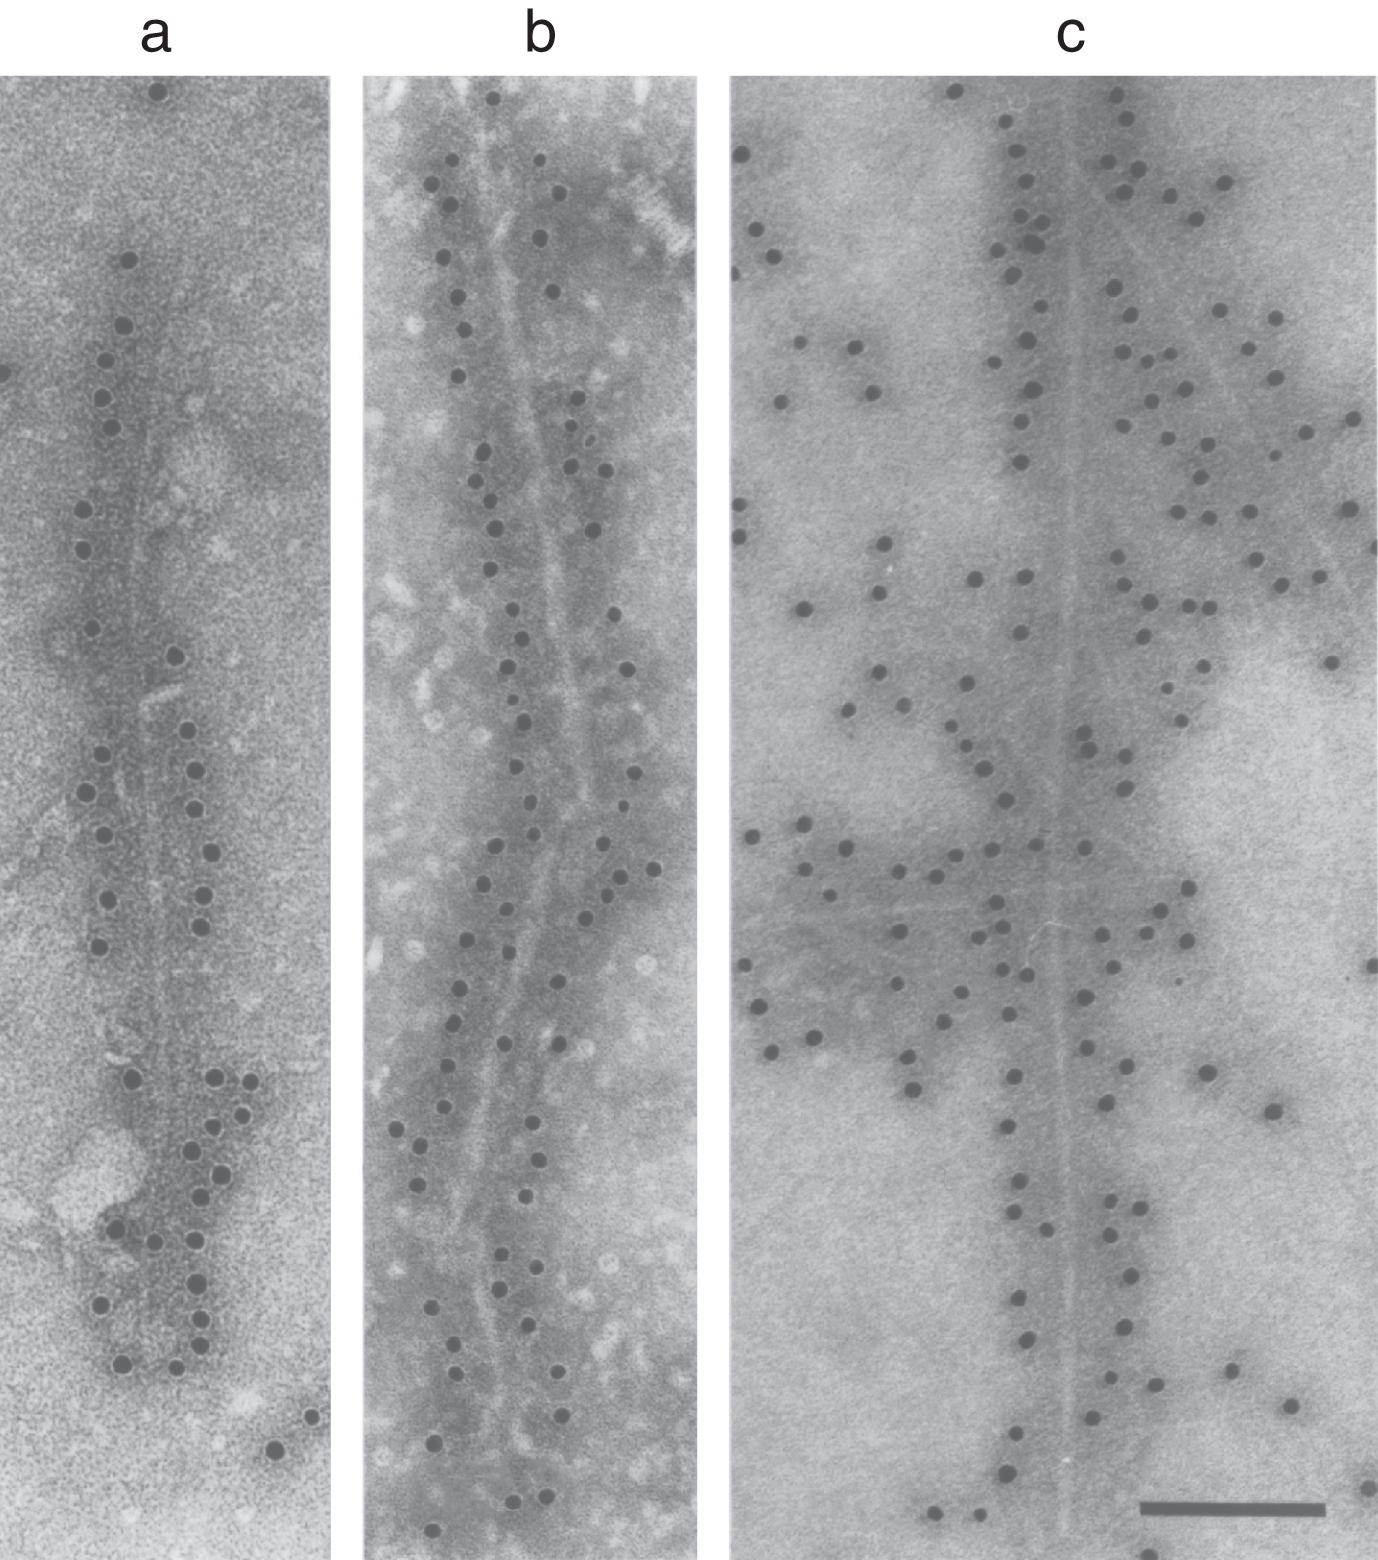 Filaments extracted from the brains of patients with dementia with Lewy bodies (a) and multiple system atrophy (b) or assembled from bacterially expressed human α-synuclein (c) were decorated by an anti-α-synuclein antibody. The gold particles conjugated to the secondary antibody appear as black dots. From Goedert and Spillantini [206].